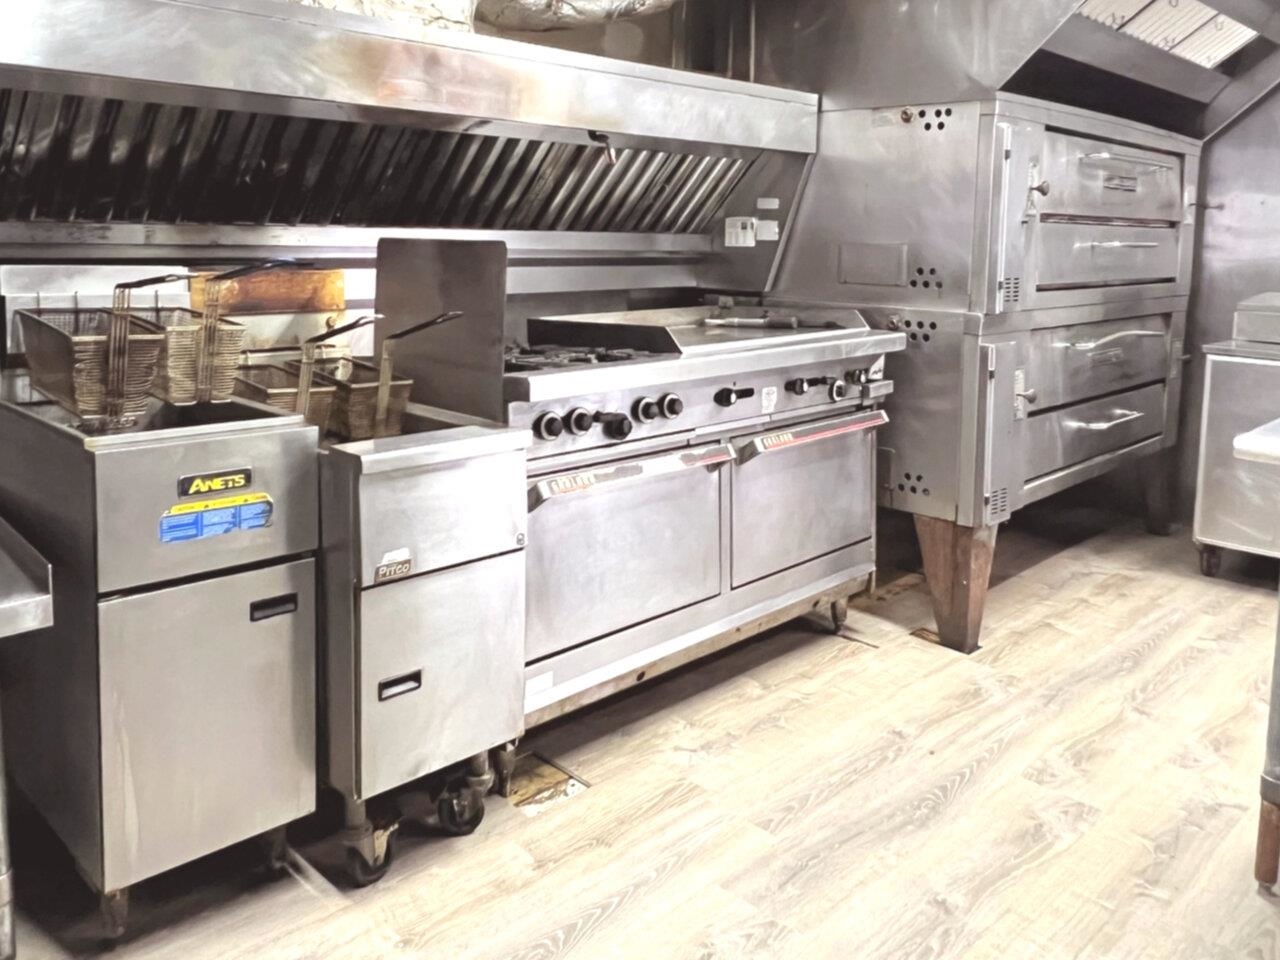 Gas stove, fryers & pizza oven